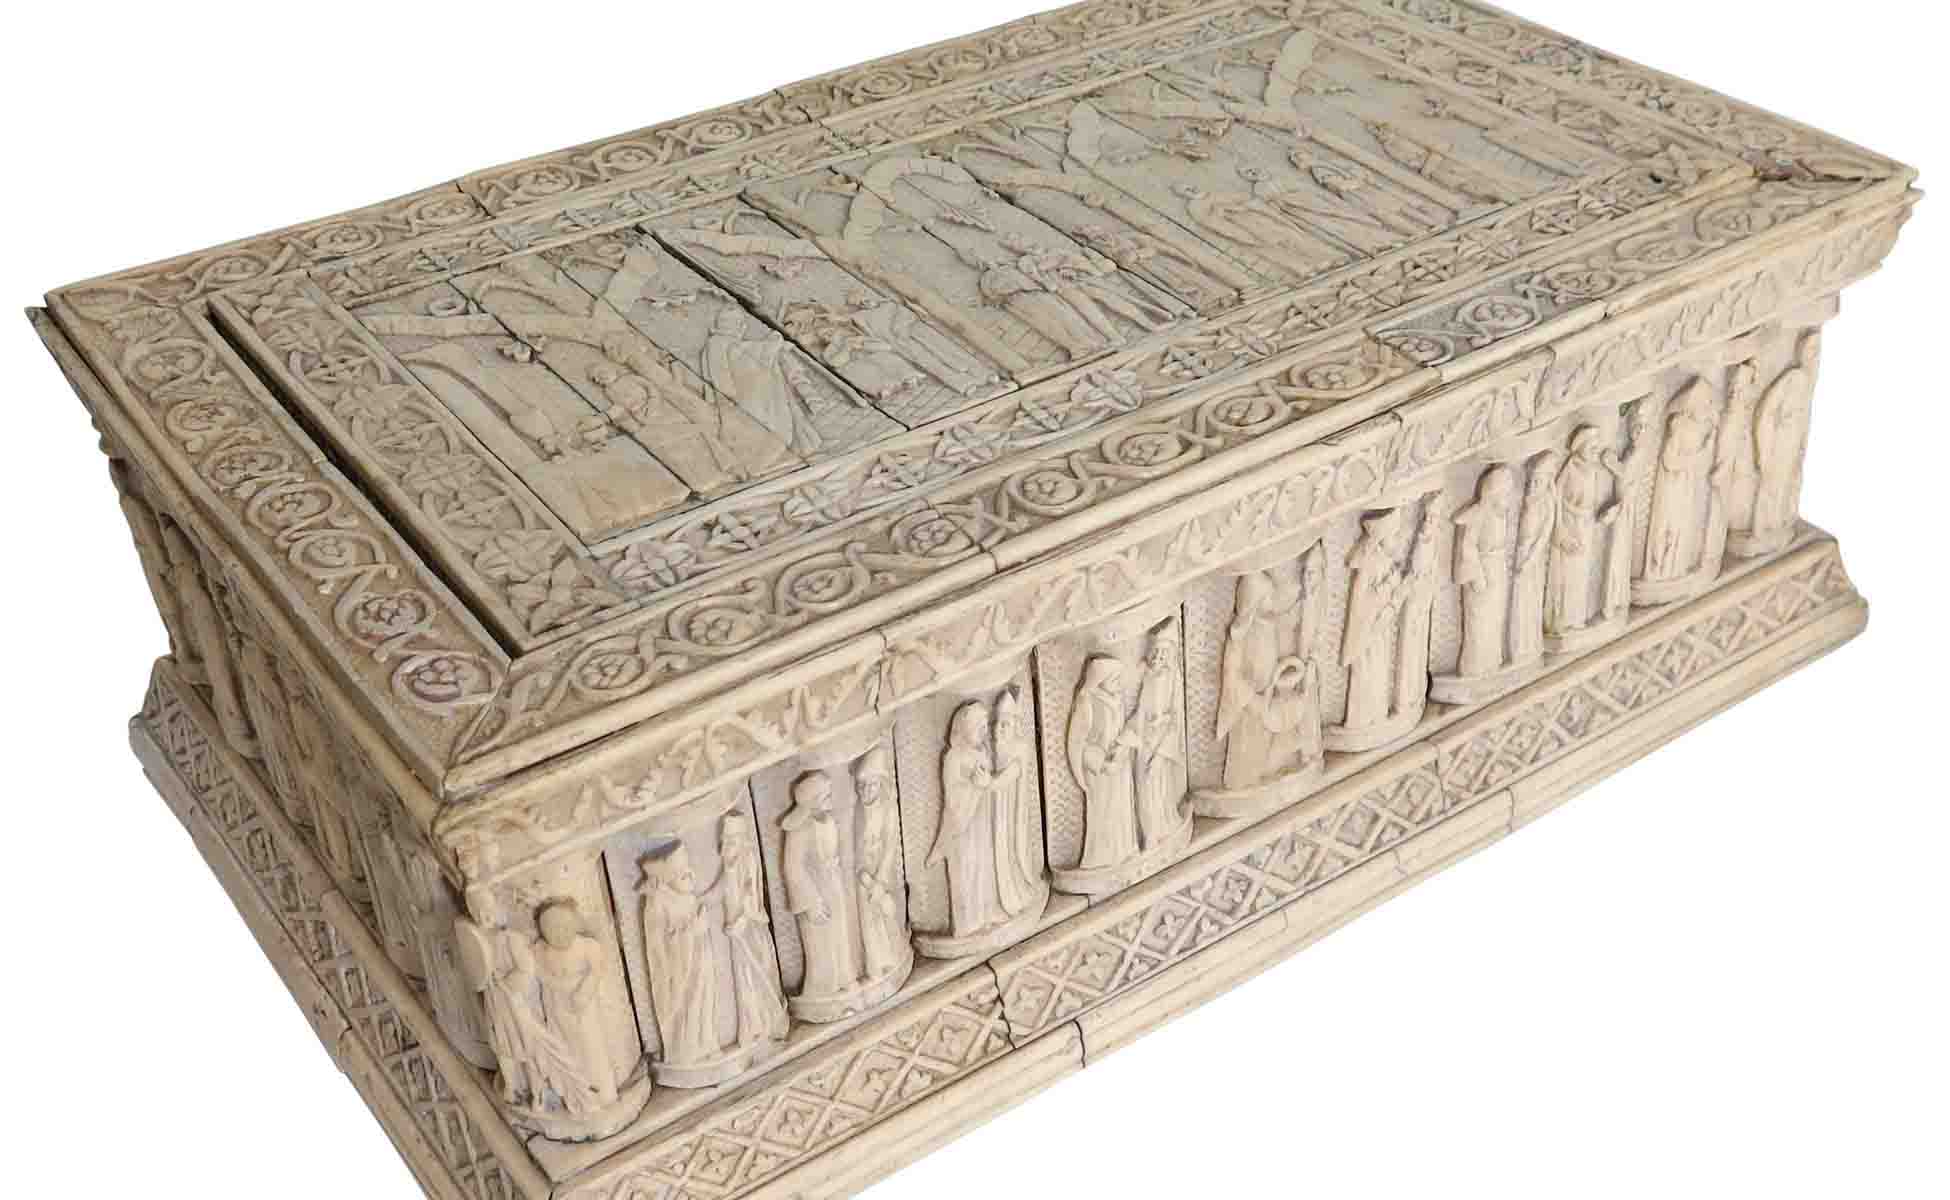 History of Marriage Casket